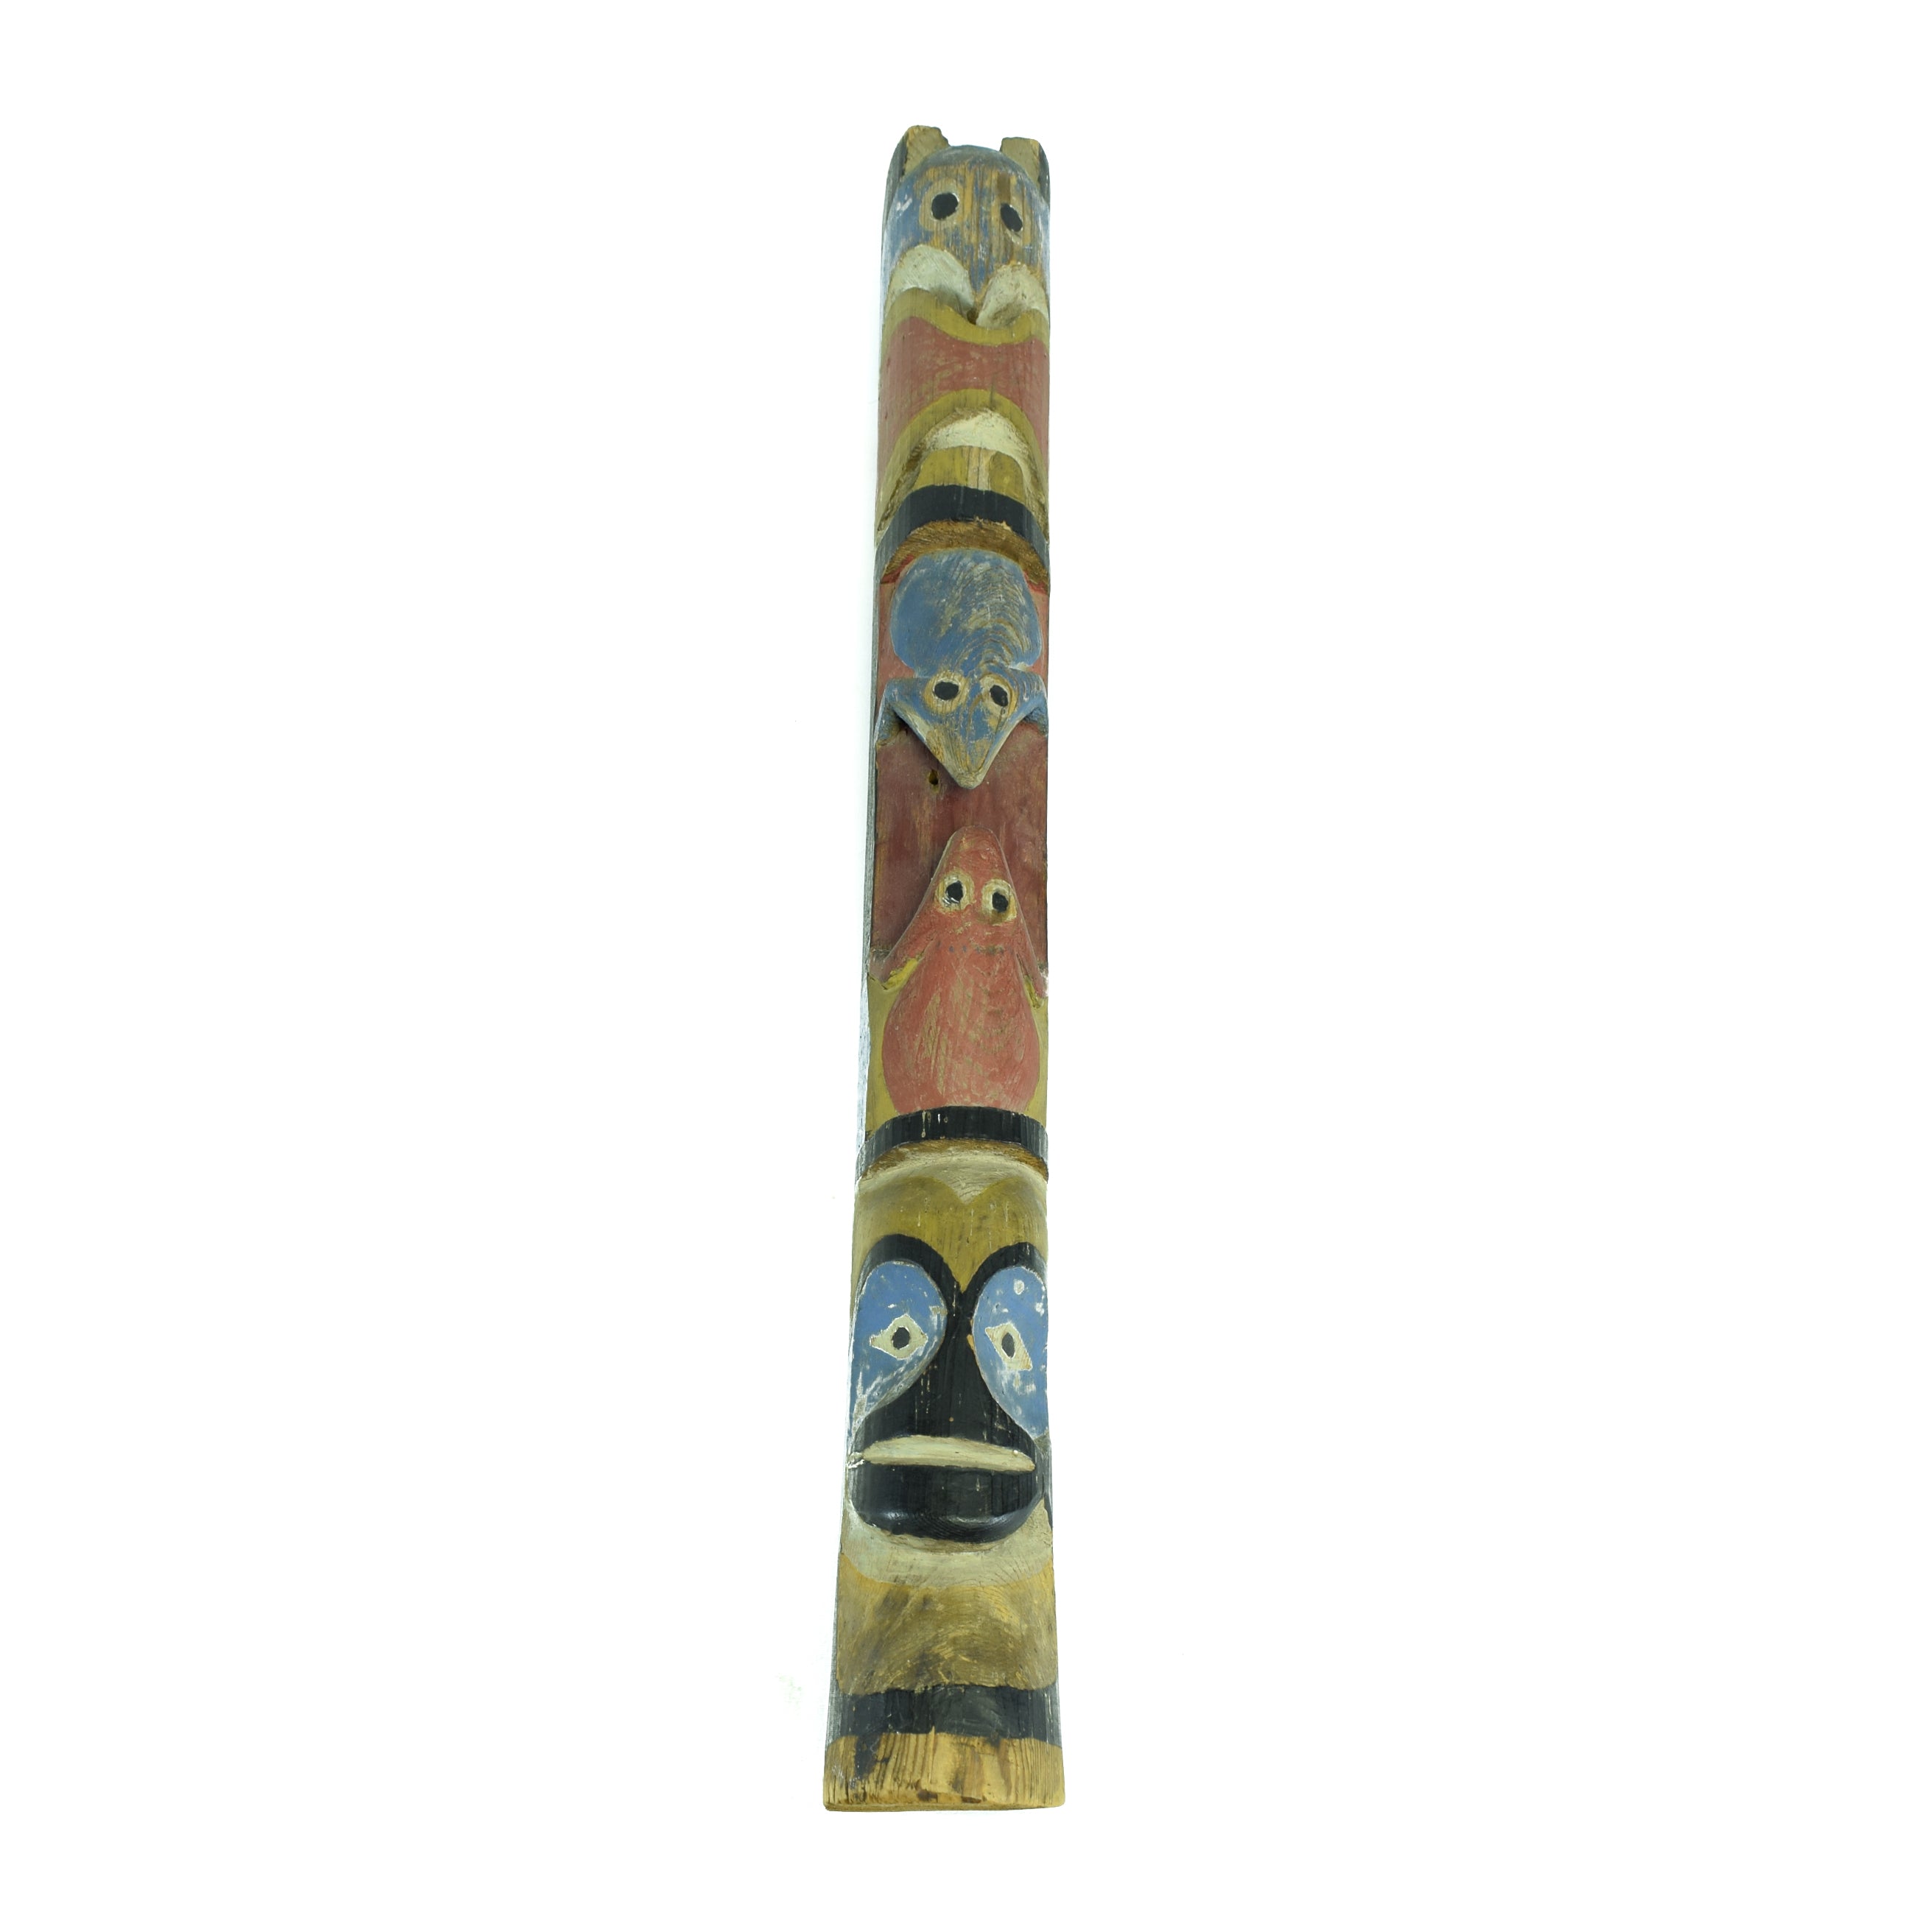 Pair of  Nuu-chah-nulth Model Totems